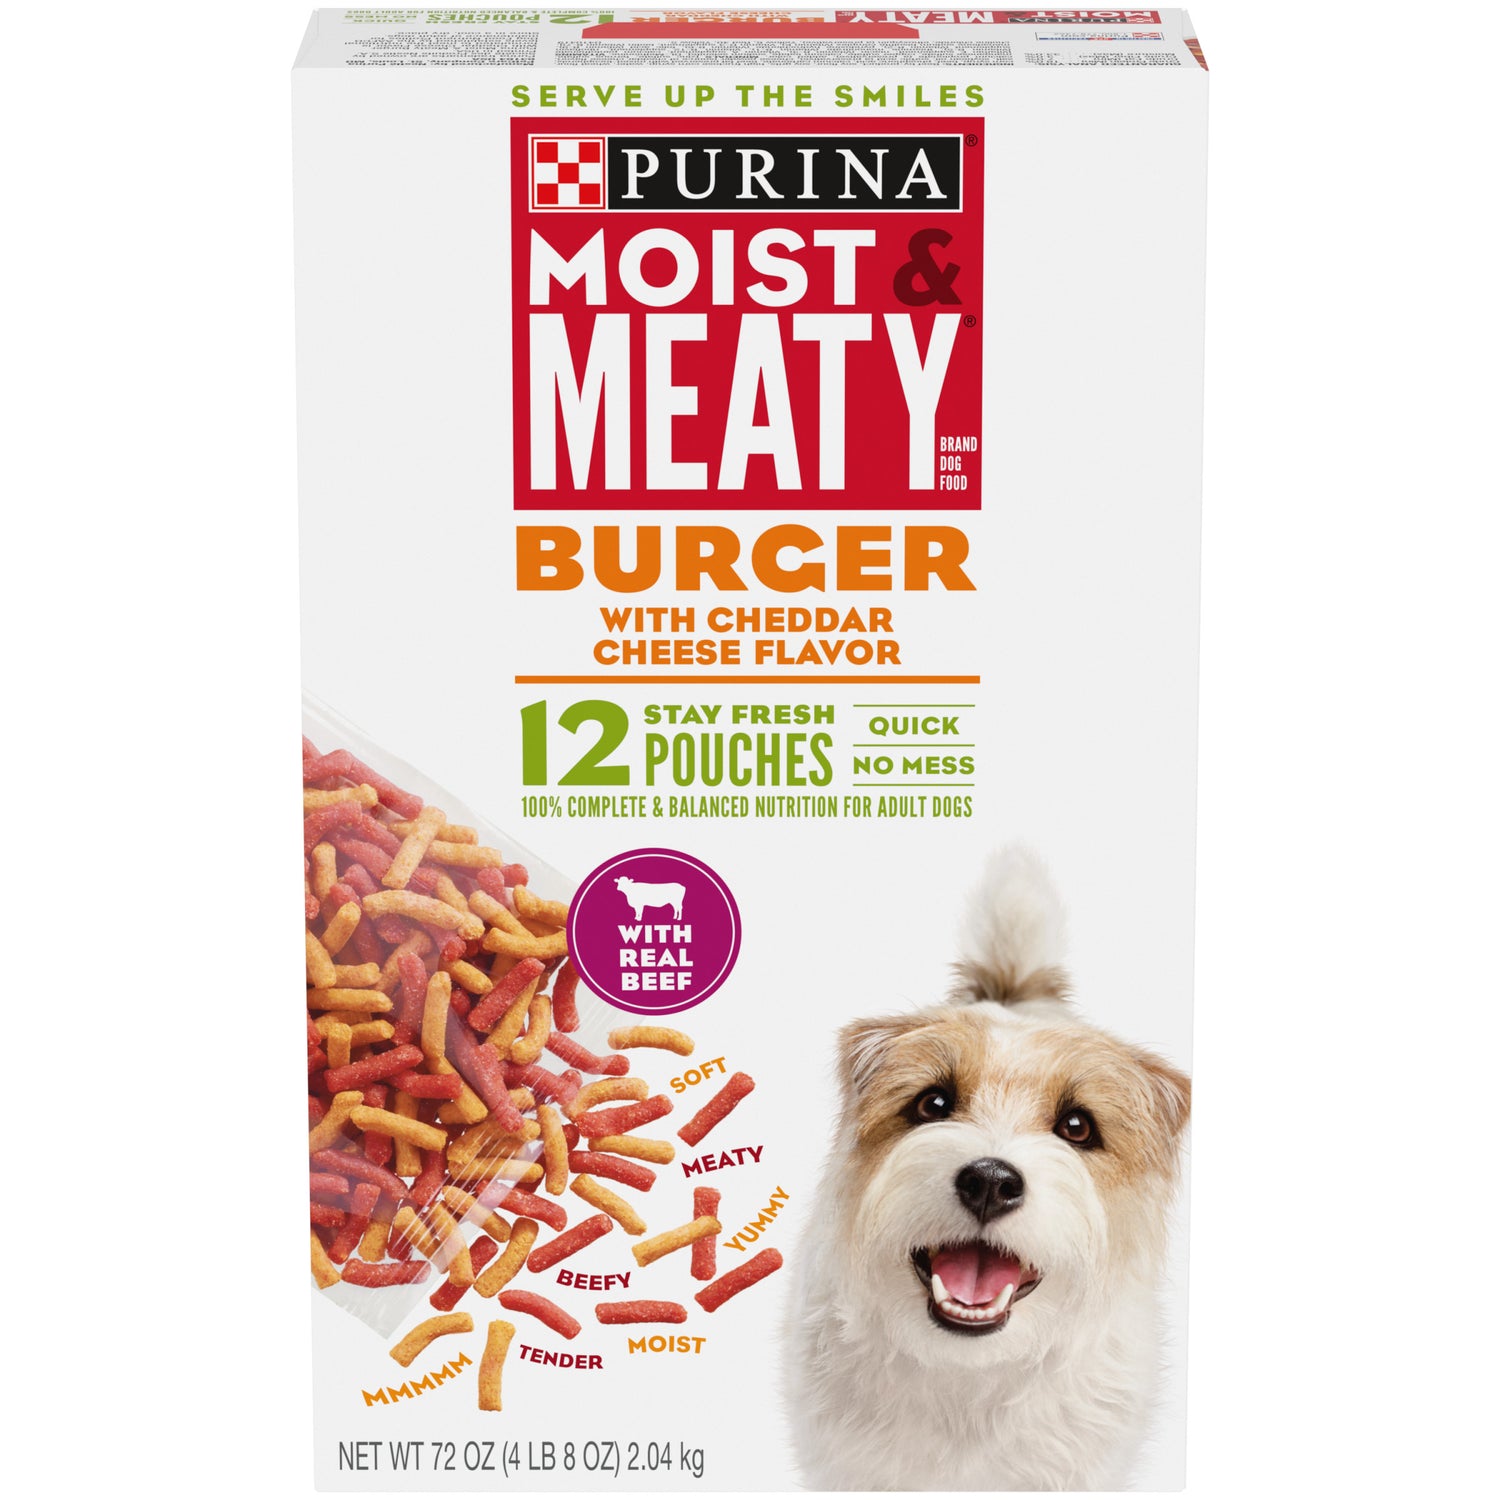 Purina Moist & Meaty Dry Dog Food, Burger with Cheddar Cheese Flavor, 12 Ct. Pouch